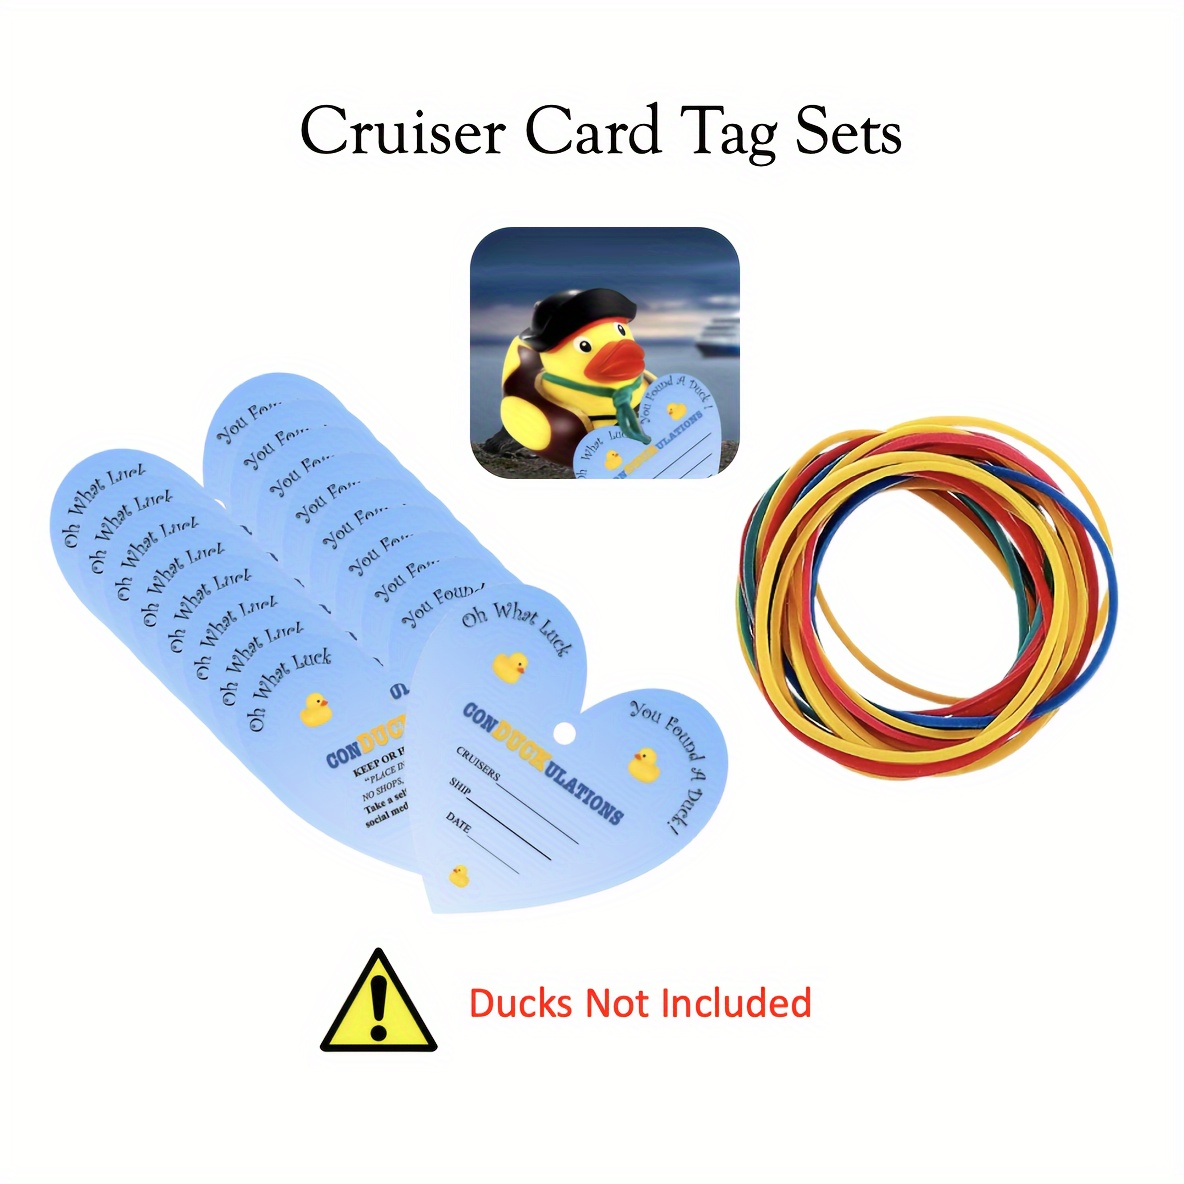 

60-piece Cruise Ship Card Set With Rubber Bands - Blue & Designs, 'show Your Kindness' Message, Fun Duck Game For Carnival Travel Essentials